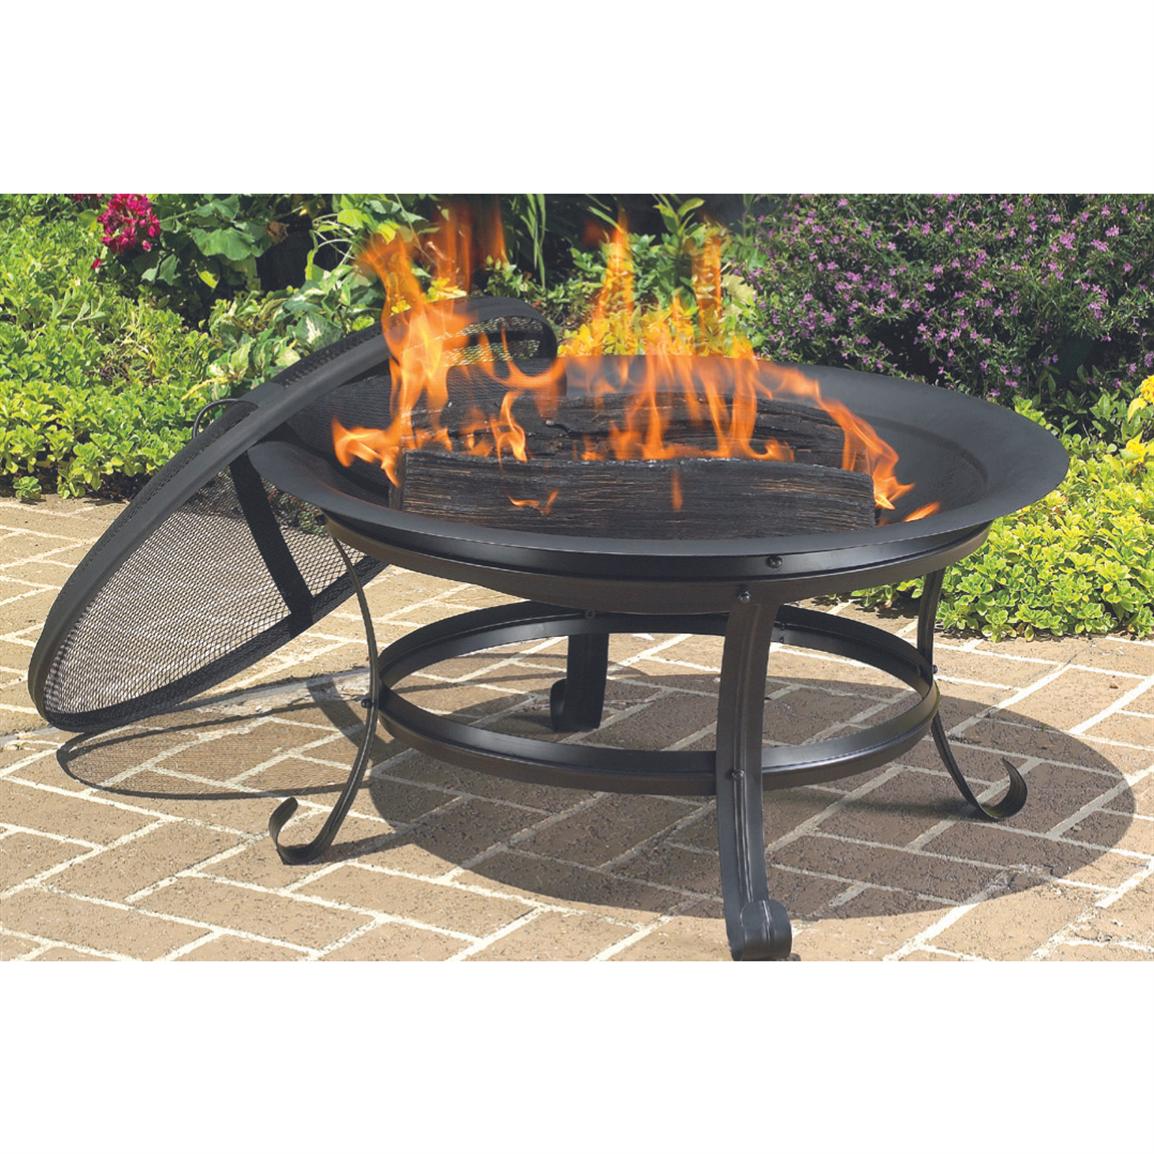 Cobraco Steel Fire Pit With Scroll, Fire Pit Legs